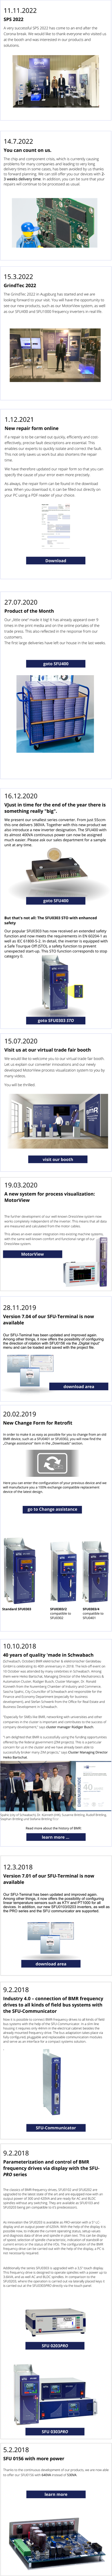 5.2.2018 SFU 0156 with more power  Thanks to the continuous development of our products, we are now able to offer our SFU0156 with 640VA instead of 530VA.  learn more 9.2.2018 Industry 4.0 – connection of BMR frequency drives to all kinds of field bus systems with the SFU-Communicator Now it is possible to connect BMR-frequency drives to all kinds of field bus systems with the help of the SFU-Communicator. In a slim line housing it requires only 44mm in the electrical cabinet besides the already mounted frequency drive. The bus adaptation takes place via fully configured, pluggable and replaceable communication modules and serve as an interface for a compact systems solution. . SFU-Communicator 12.3.2018 Version 7.01 of our SFU-Terminal is now available Our SFU-Teminal has been updated and improved again. Among other things, it now offers the possibility of configuring linear temperature sensors such as KTY and PT1000 for all devices. In addition, our new SFU0103/0203 inverters, as well as the PRO series and the SFU communicator are supported. download area 9.2.2018 Parameterization and control of BMR frequency drives via display with the SFU-PRO series  The classics of BMR-frequency drives, SFU0102 and SFU0202 are upgraded to the latest state of the art and are equipped now with an output power of 300 and 420VA and are ready for AC and BLDC spindles without any switching. They are available as SFU0103 and SFU0203 being pin compatible to it's predecessors.  As innovation the SFU0203 is available as PRO-version with a 5"-LC-display and an output power of 620VA. With the help of the display it is possible now, to indicate the current operating status, setup values and diagnosis data of drive and spindle in plain text. This can be display of speed, selection of spindle characteristic, indication of standstill or current errors or the status of the I/Os. The configuration of the BMR frequency drive can be carried out with the help of the display, a PC is not necessarily required.  Additionally the series SFU0303 is upgraded with a 3,5" touch display. This frequency drive is designed to operate spindles with a power up to 3.6kVA, and as well AC and BLDC spindles. In comparison to the SFU0203, where the operation is carried out via laterally placed keys it is carried out at the SFU0303PRO directly via the touch panel. SFU 0203PRO SFU 0303PRO Spahic (city of Schwabach), Dr. Künneth (IHK), Susanne Brittling, Rudolf Brittling, Stephan Brittling und Stefanie Brittling f.l.t.r 10.10.2018 40 years of quality 'made in Schwabach  (Schwabach, October) BMR elektrischer & elektronischer Gerätebau GmbH is celebrating its 40th anniversary in 2018. The kick-off event on 10 October was attended by many celebrities in Schwabach. Among them were Heiko Bartschat, Managing Director of the Mechatronics & Automation Cluster, Rüdiger Busch, Cluster Manager, Dr. Ronald Künneth from the Nuremberg Chamber of Industry and Commerce, Sascha Spahic, City Councillor of Schwabach and responsible for the Finance and Economy Department (especially for business development), and Stefan Schwenk from the Office for Real Estate and Business Development in Schwabach.  "Especially for SMEs like BMR, networking with universities and other companies in the cluster is important and contributes to the success of company development," says cluster manager Rüdiger Busch.   "I am delighted that BMR is successfully using the funding opportunities offered by the federal government (ZIM projects). This is a particular concern for us in the cluster and we have already been able to successfully broker many ZIM projects," says Cluster Managing Director Heiko Bartschat.  Read more about the history of BMR: learn more … 20.02.2019 New Change Form for Retrofit  In order to make it as easy as possible for you to change from an old BMR device, such as a SFU0401 or SFU0302, you will now find the „Change assistance“ item in the „Downloads“ section.         Here you can enter the configuration of your previous device and we will manufacture you a 100% exchange compatible replacement device of the latest design. Standard SFU0303 SFU0303/2 compatible to SFU0302 SFU0303/4 compatible to SFU0401 go to Change assistance 28.11.2019 Version 7.04 of our SFU-Terminal is now available Our SFU-Teminal has been updated and improved again. Among other things, it now offers the possibility of configuring the direction of rotation with SFU0156 via the „Digital Input“ menu and can be loaded and saved with the project file.  download area 19.03.2020 A new system for process visualization: MotorView   The further development of our well-known DressView system now works completely independent of the inverter. This means that all data are measured and calculated from the motor cables. This allows an even easier integration into existing machine systems, with the same well-known comfort and functional range of our DressView system.   MotorView visit our booth 15.07.2020 Visit us at our virtual trade fair booth We would like to welcome you to our virtual trade fair booth. Let us explain our converter innovations and our newly developed MotorView process visualization system to you by many videos.  You will be thrilled.  16.12.2020 VJust in time for the end of the year there is something really "big". We present our smallest series converter. From just 55ccm this one delivers 380VA. Together with this new product we also introduce a new inverter designation. The SFU400 with its almost 400VA continuous power can now be assigned much easier. Please ask our sales department for a sample unit at any time.         But that's not all: The SFU0303 STO with enhanced safety Our popular SFU0303 has now received an extended safety function and now meets the requirements in EN 60204-1 as well as IEC 61800-5-2. In detail, the inverter is equipped with a Safe Tourque Off (STO), a safety function to prevent unexpected start-up. This STO function corresponds to stop category 0.  goto SFU0303 STO goto SFU400 27.07.2020 Product of the Month Our „little one“ made it big! It has already appeard over 9 times in the print media and on the online portales of the trade press. This also reflected in the response from our customers.The first large deliveries have left our house in the last weeks. goto SFU400 1.12.2021 New repair form online If a repair is to be carried out quickly, efficiently and cost-effectively, precise fault descriptions are essential. This enables our experts to quickly isolate and correct the fault. This not only saves us work but also shortens the repair time.  We have therefore updated our repair form so that you can specify the cause of your error even more precisely.  As always, the repair form can be found in the download area. When you download it, it can be filled out directly on your PC using a PDF reader of your choice. Download 15.3.2022 GrindTec 2022 The GrindTec 2022 in Augsburg has started and we are looking forward to your visit. You will have the opportunity to see our new products, such as our MotorView system, as well as our SFU400 and SFU1000 frequency inverters in real life.  14.7.2022 You can count on us. The chip and component crisis, which is currently causing problems for many companies and leading to very long delivery times in some cases, has been avoided by us thanks to forward planning. We can still offer you our devices with 2-3 weeks delivery time. In addition, you can be sure that your repairs will continue to be processed as usual.  11.11.2022 SPS 2022 A very successful SPS 2022 has come to an end after the Corona break. We would like to thank everyone who visited us at the booth and was interested in our products and solutions.